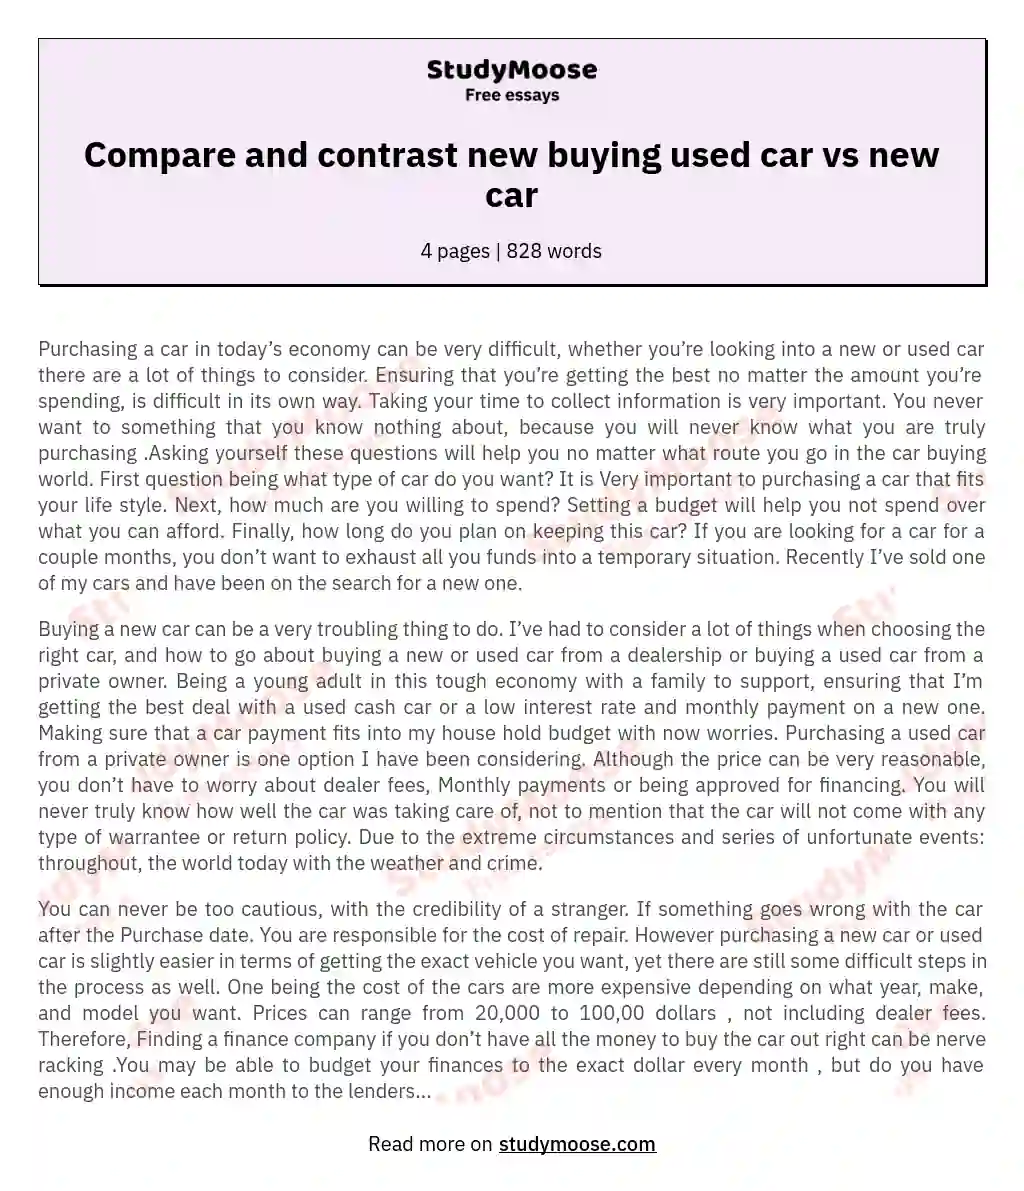 Compare and contrast new buying used car vs new car essay